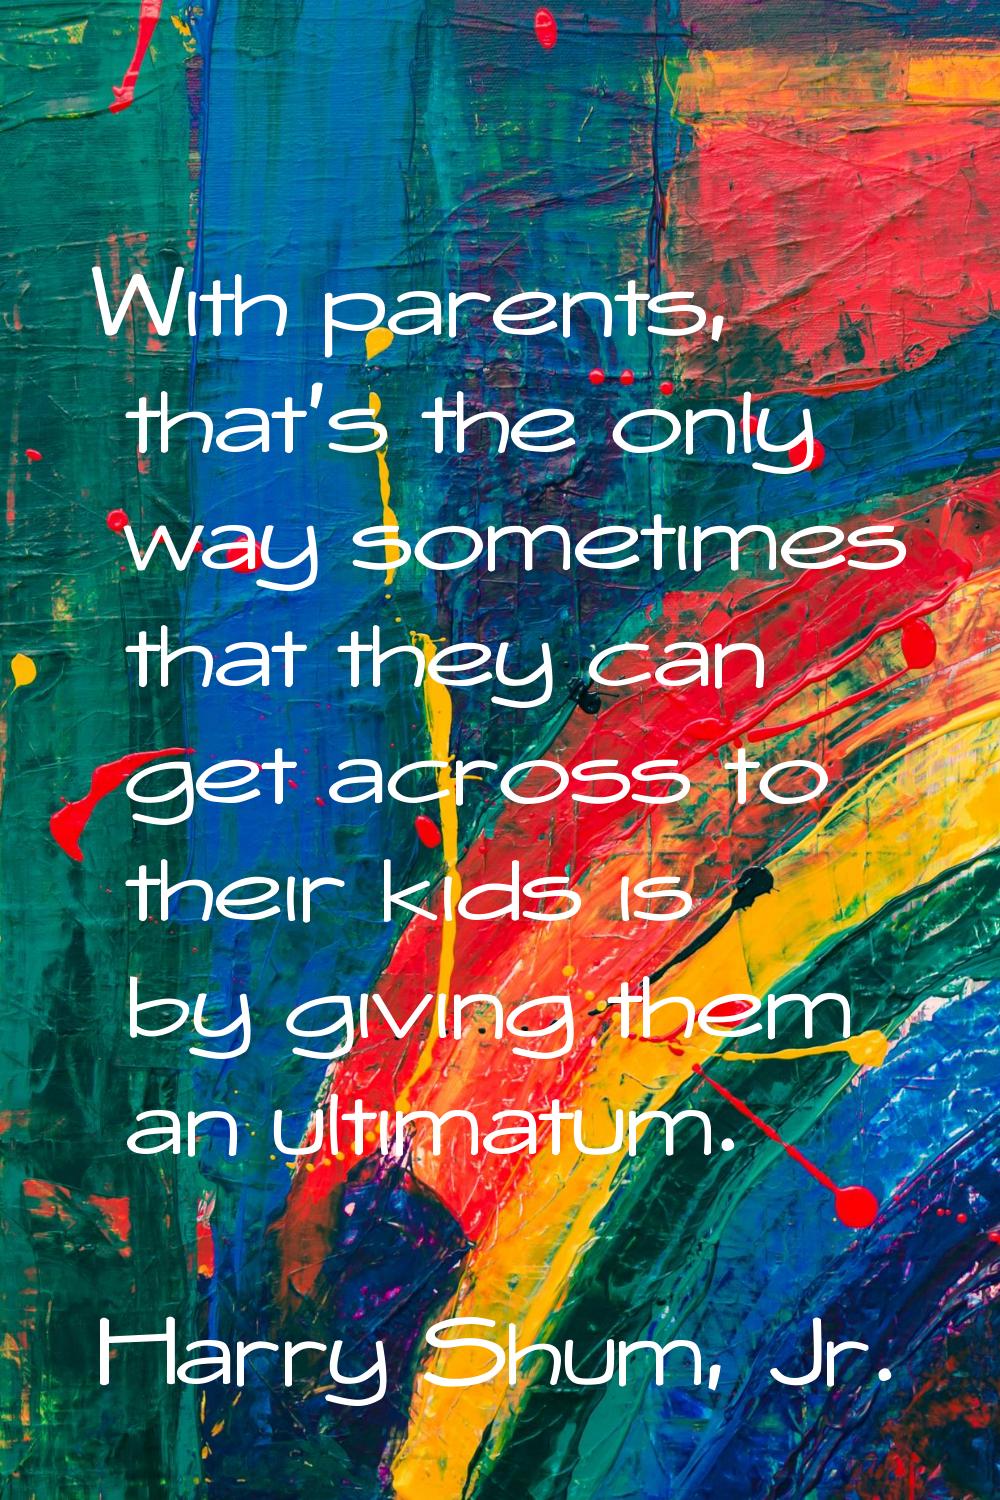 With parents, that's the only way sometimes that they can get across to their kids is by giving the